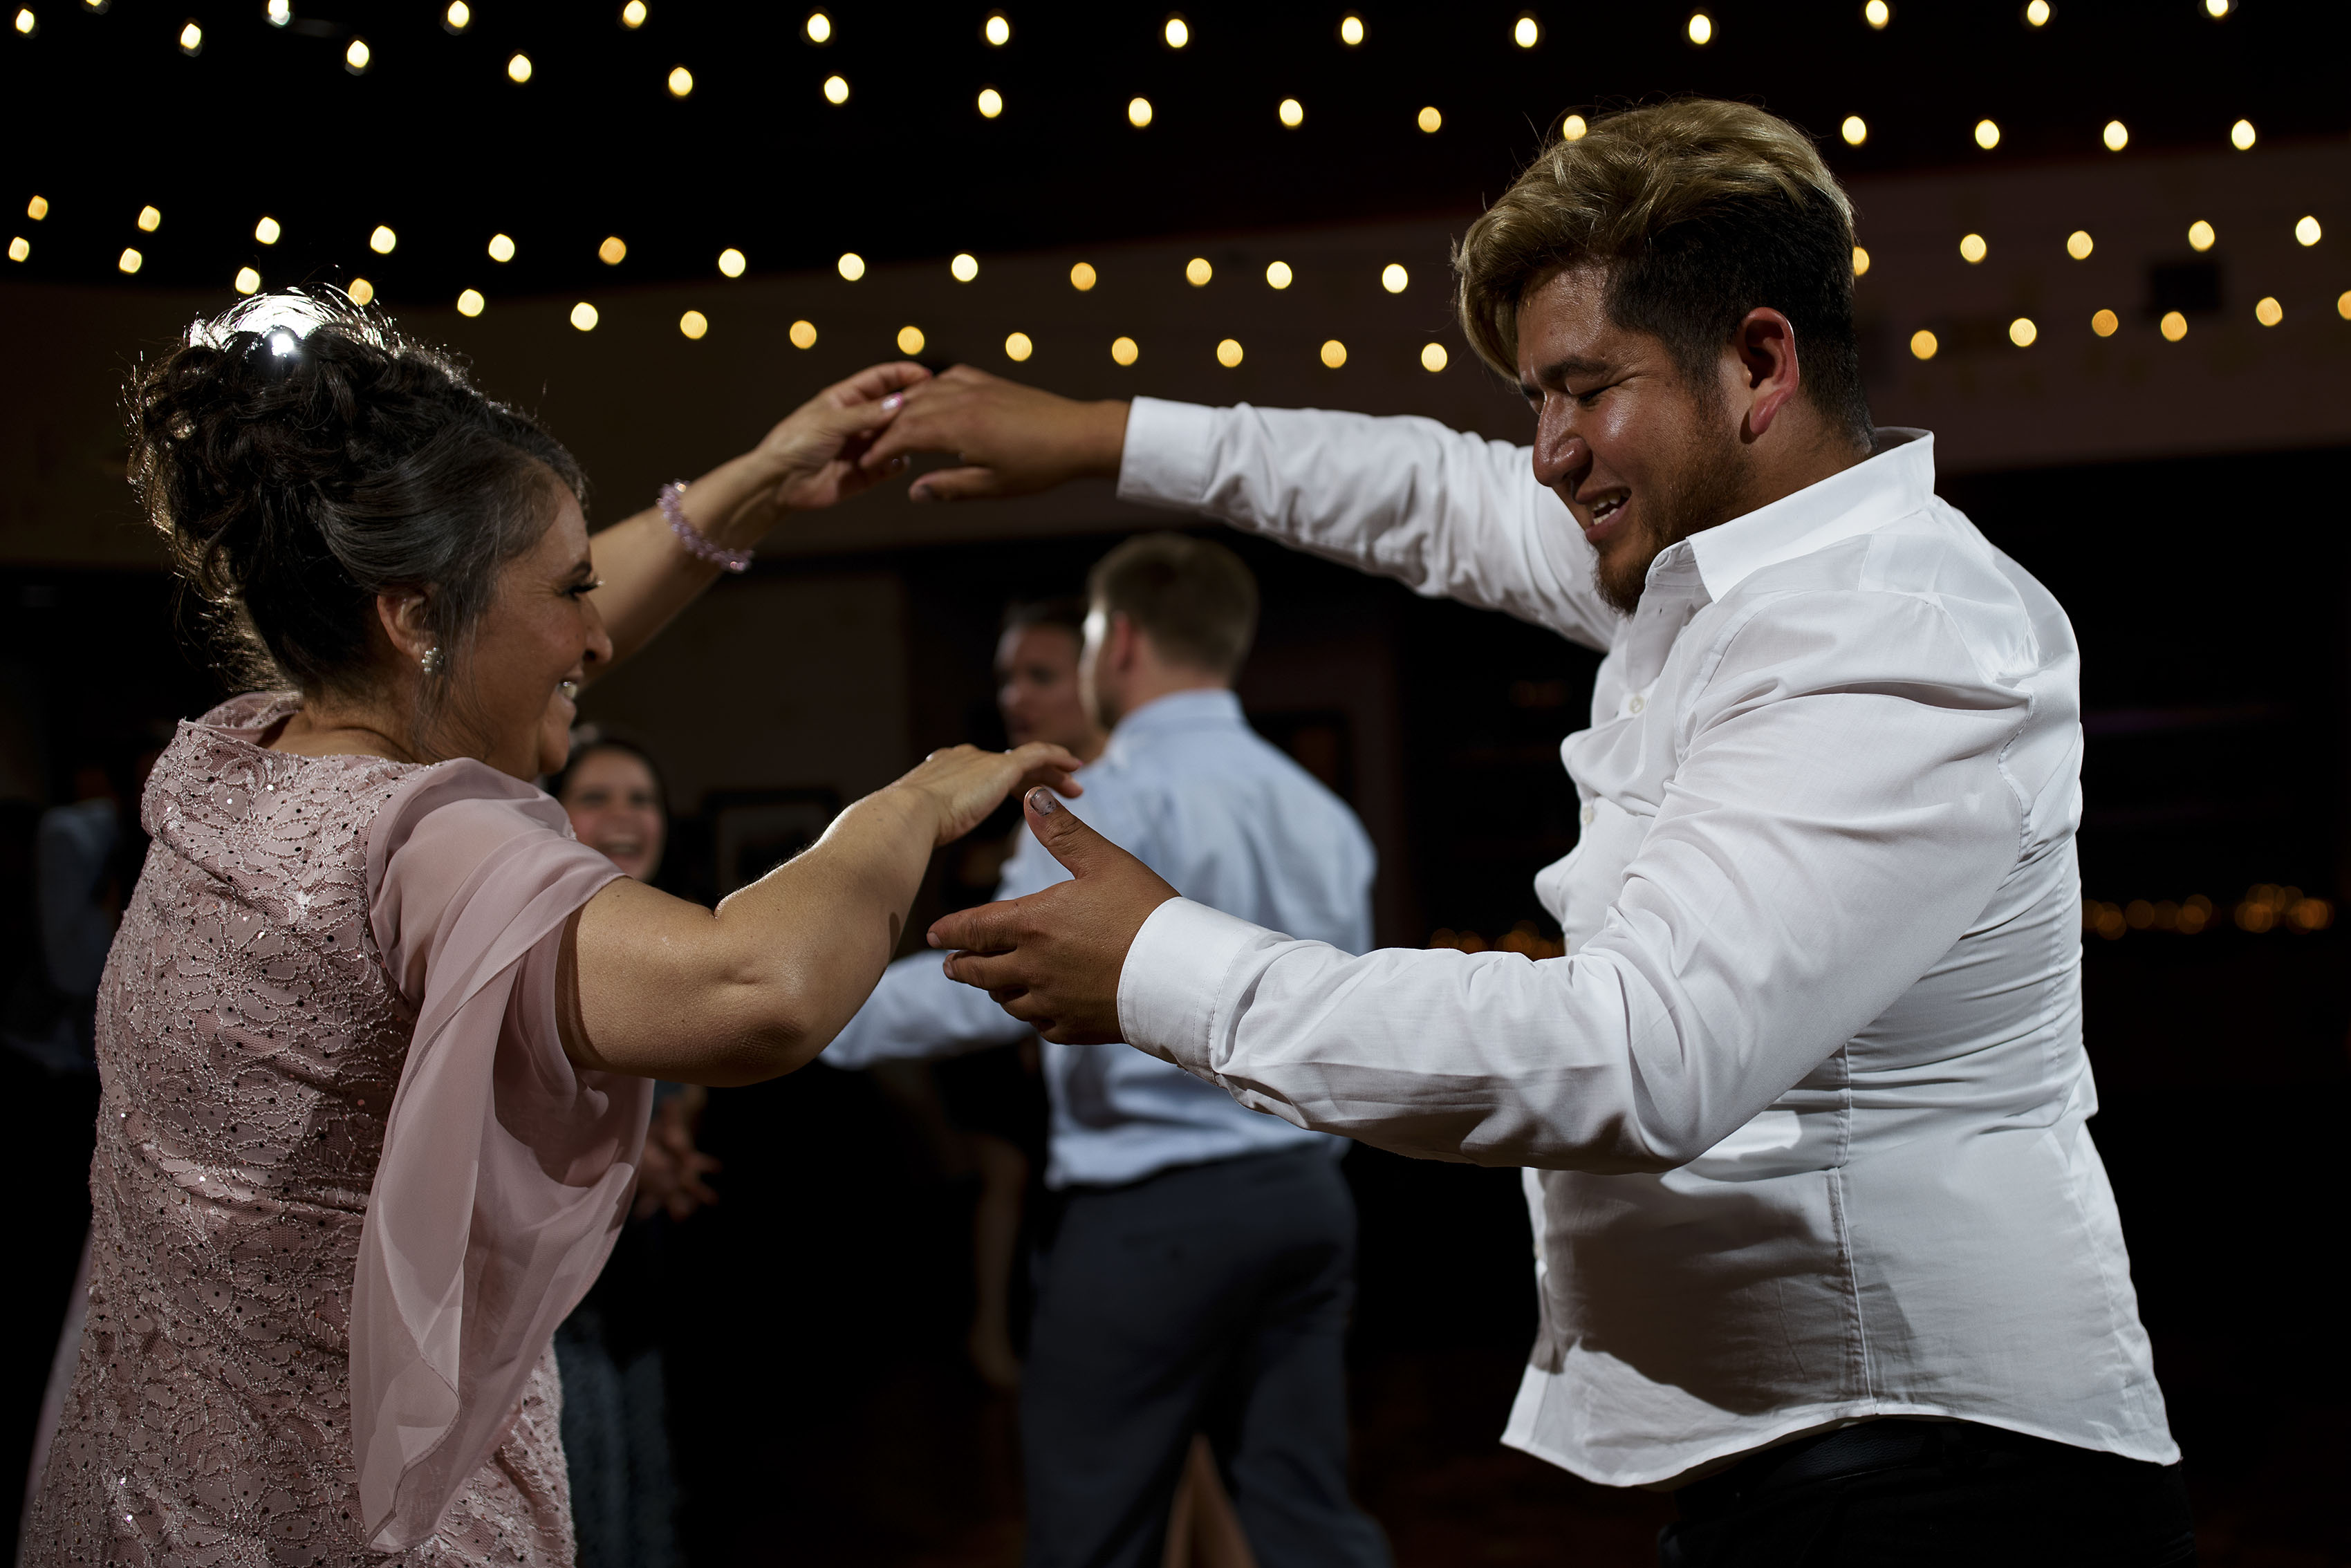 guests dance during a wedding reception at Holy Name Catholic Church